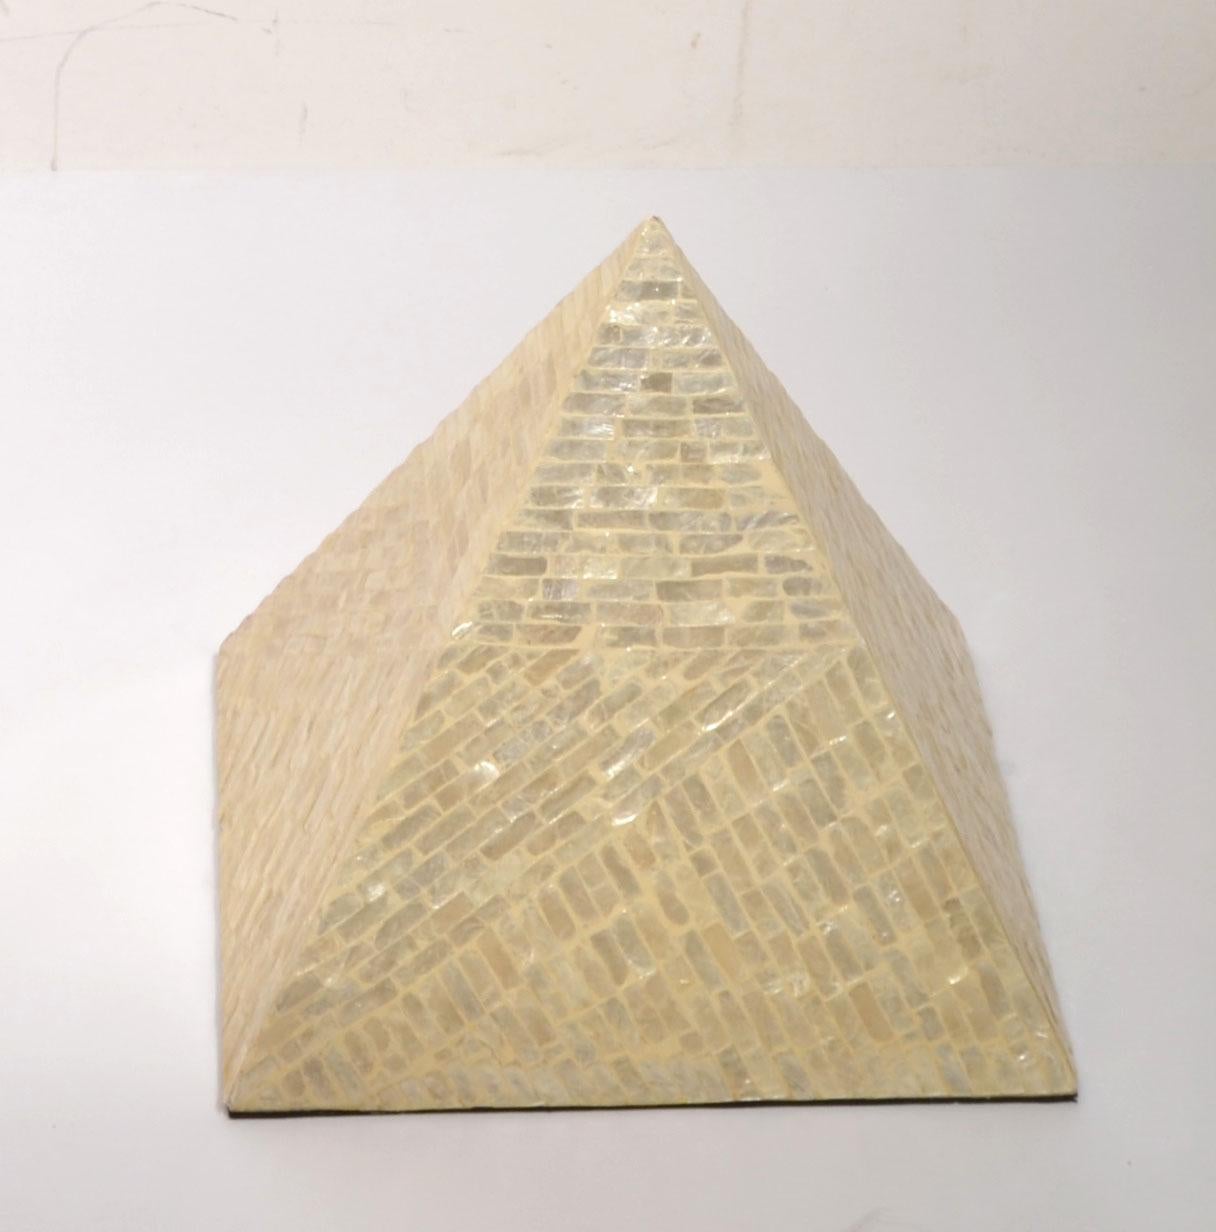 1980 Italian Pyramid Mother Of Pearl Wood Sculpture Decorative Objects for Objects Fine Art 